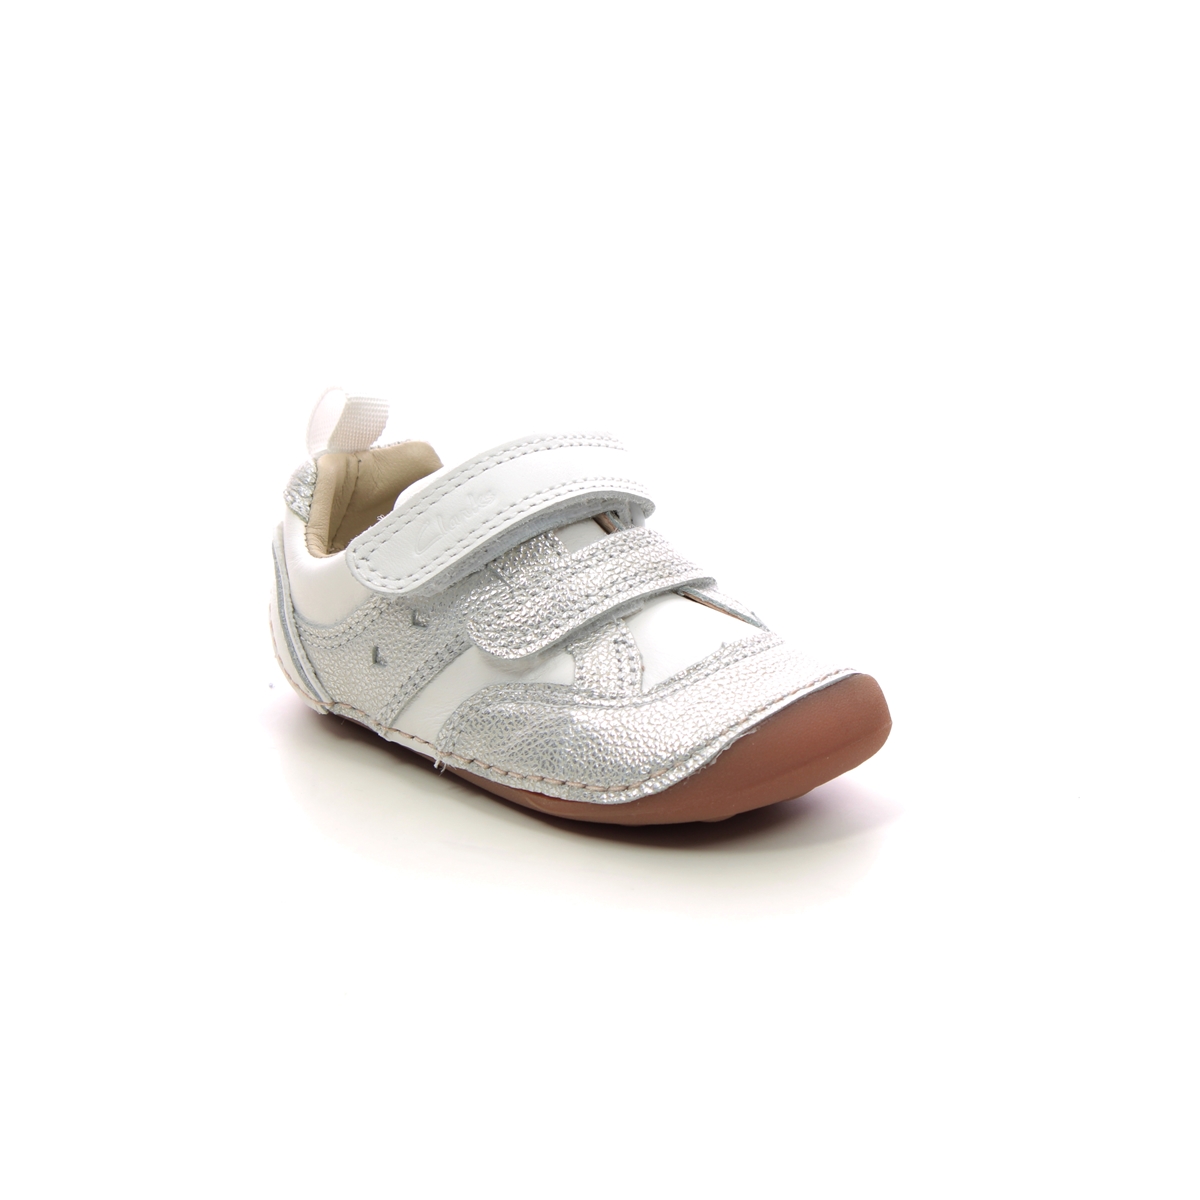 Clarks Tiny Sky T White Silver Kids girls first and baby shoes 7182-66F in a Plain Leather in Size 3